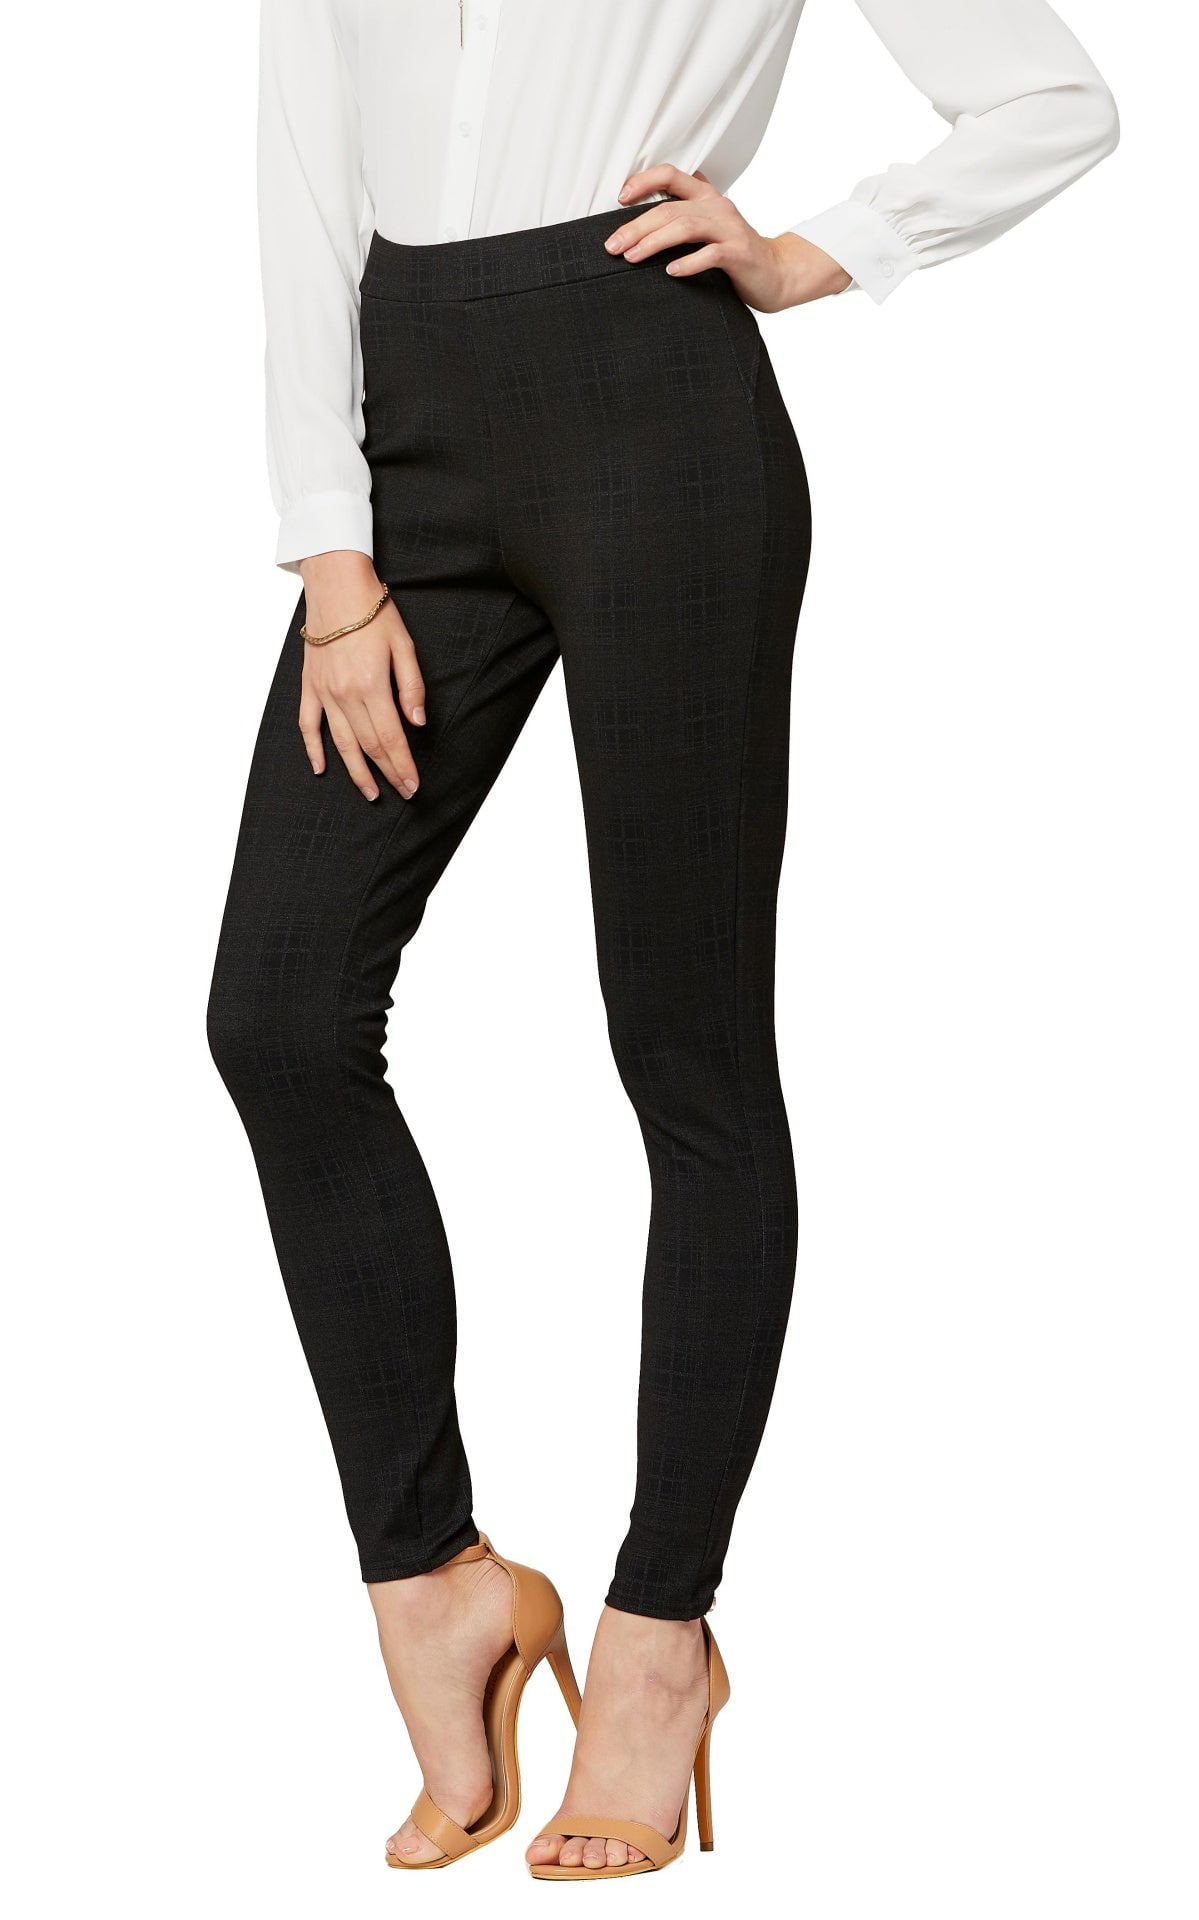 Conceited Women's Motivate Stretch Knit Ponte Pants - Dressy Leggings -  Wear to Work